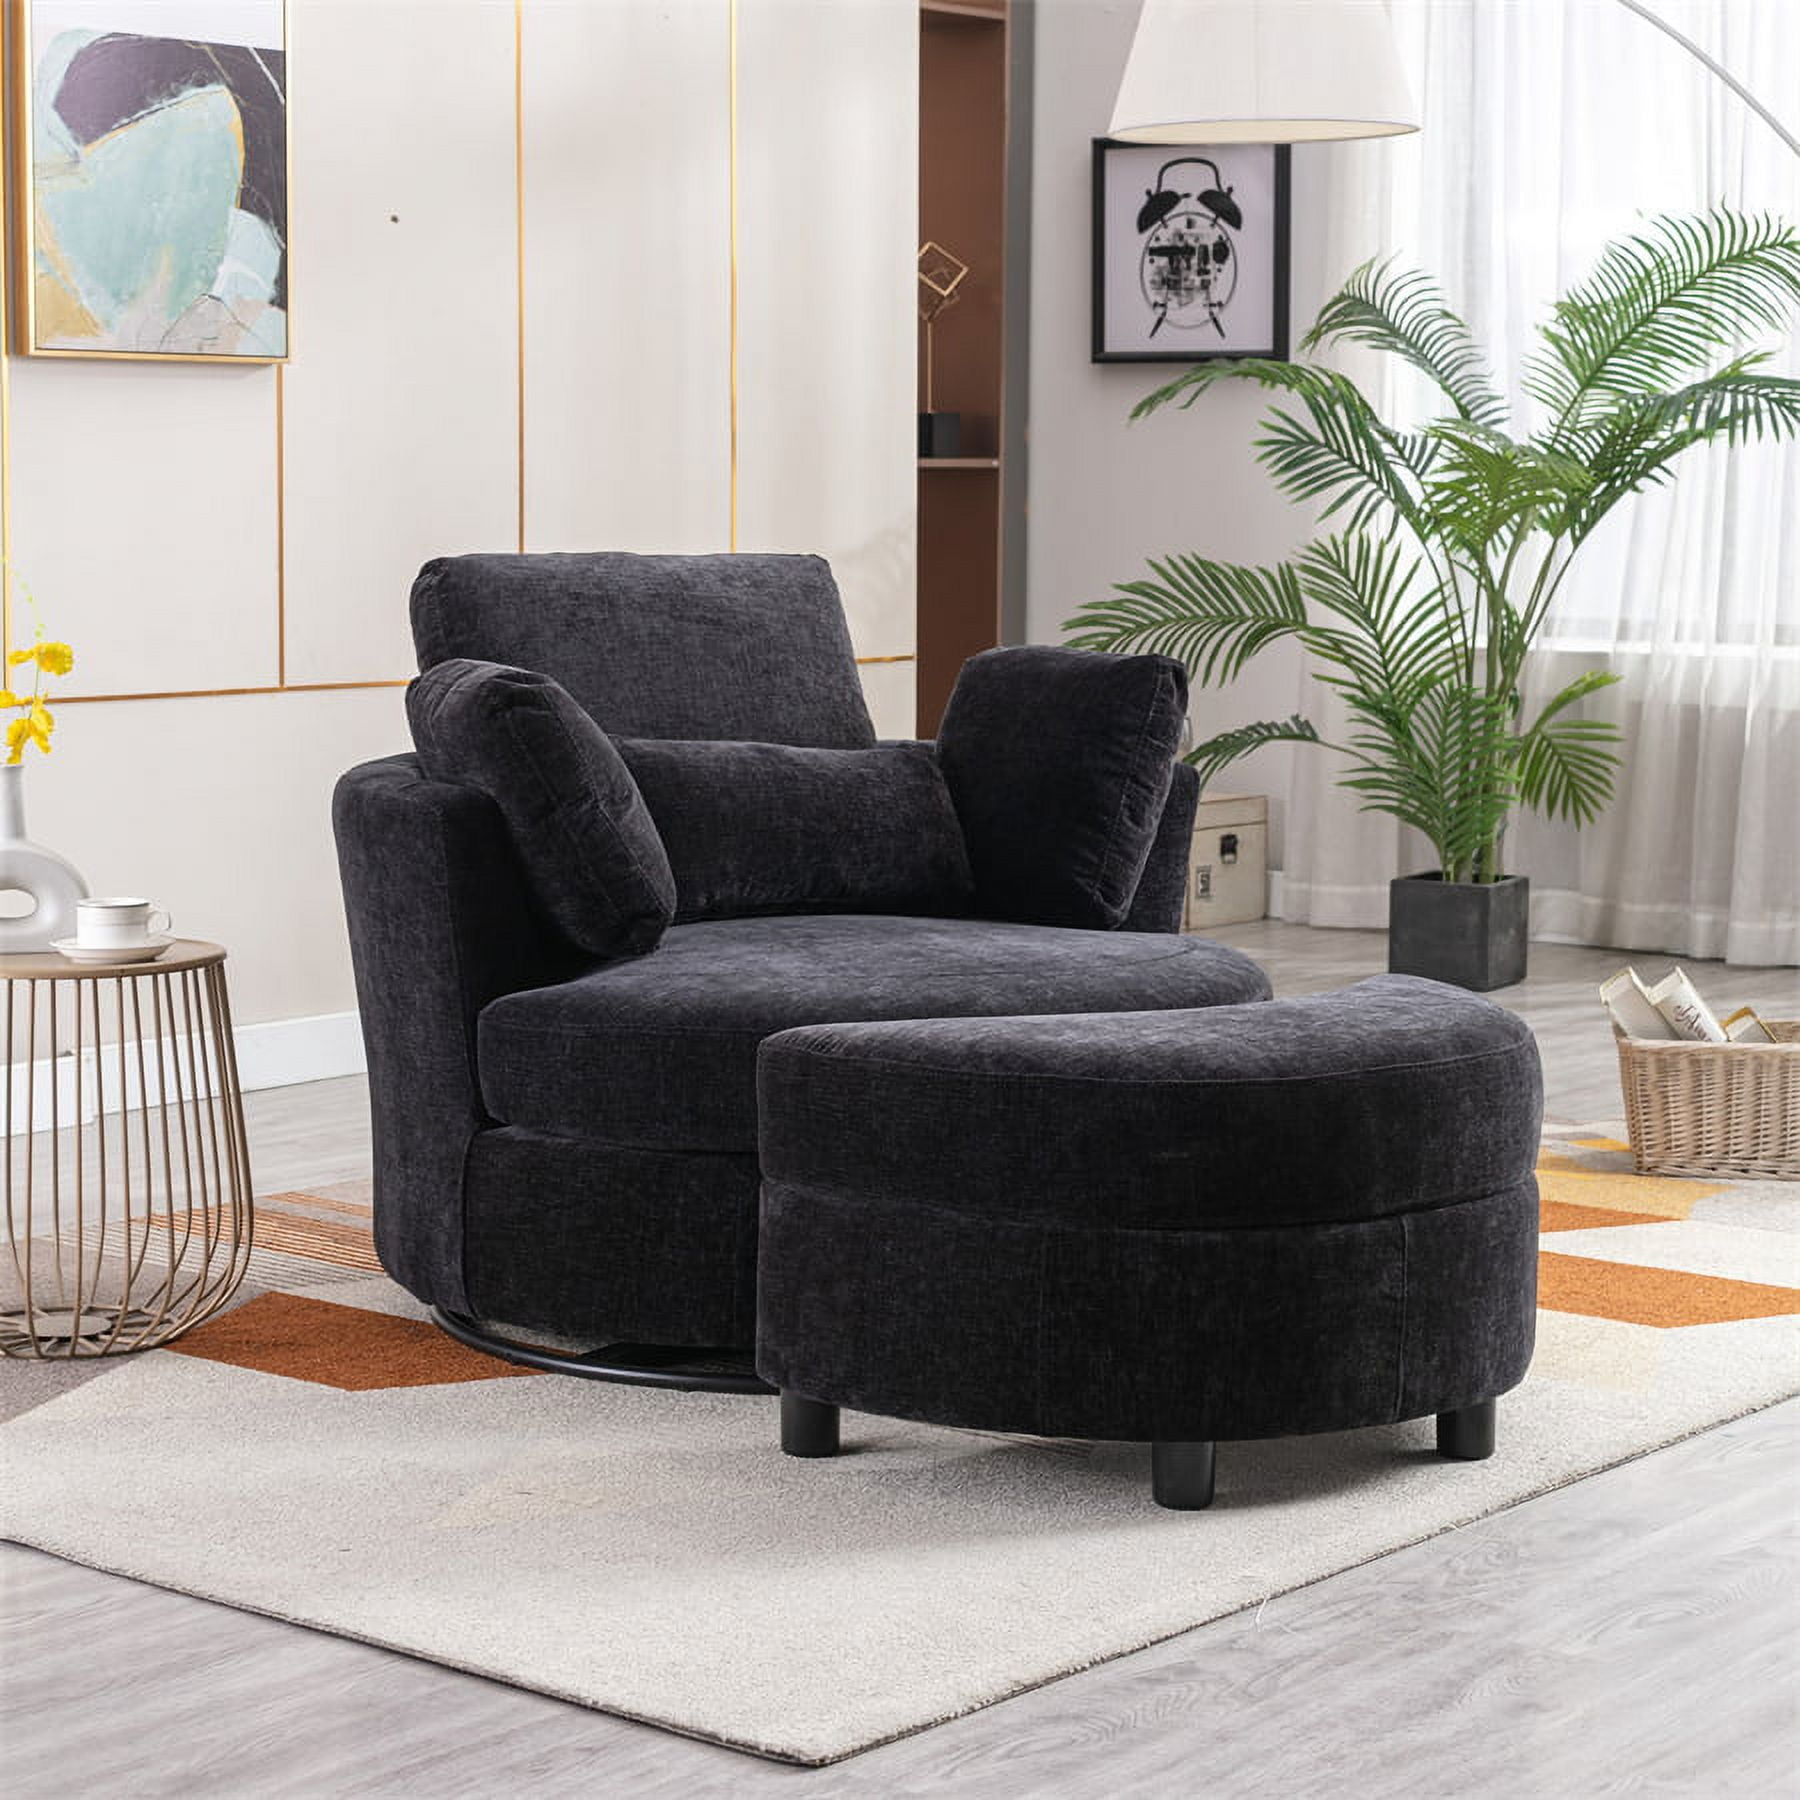 42.2 Swivel Barrel Chair with Half Crescent Moon Storage Bench,  Upholstered Accent Arm Chair with Metal Base and Removable Seat Cushion,  Modern Footstool Ottoman for Living Room, Bedroom 